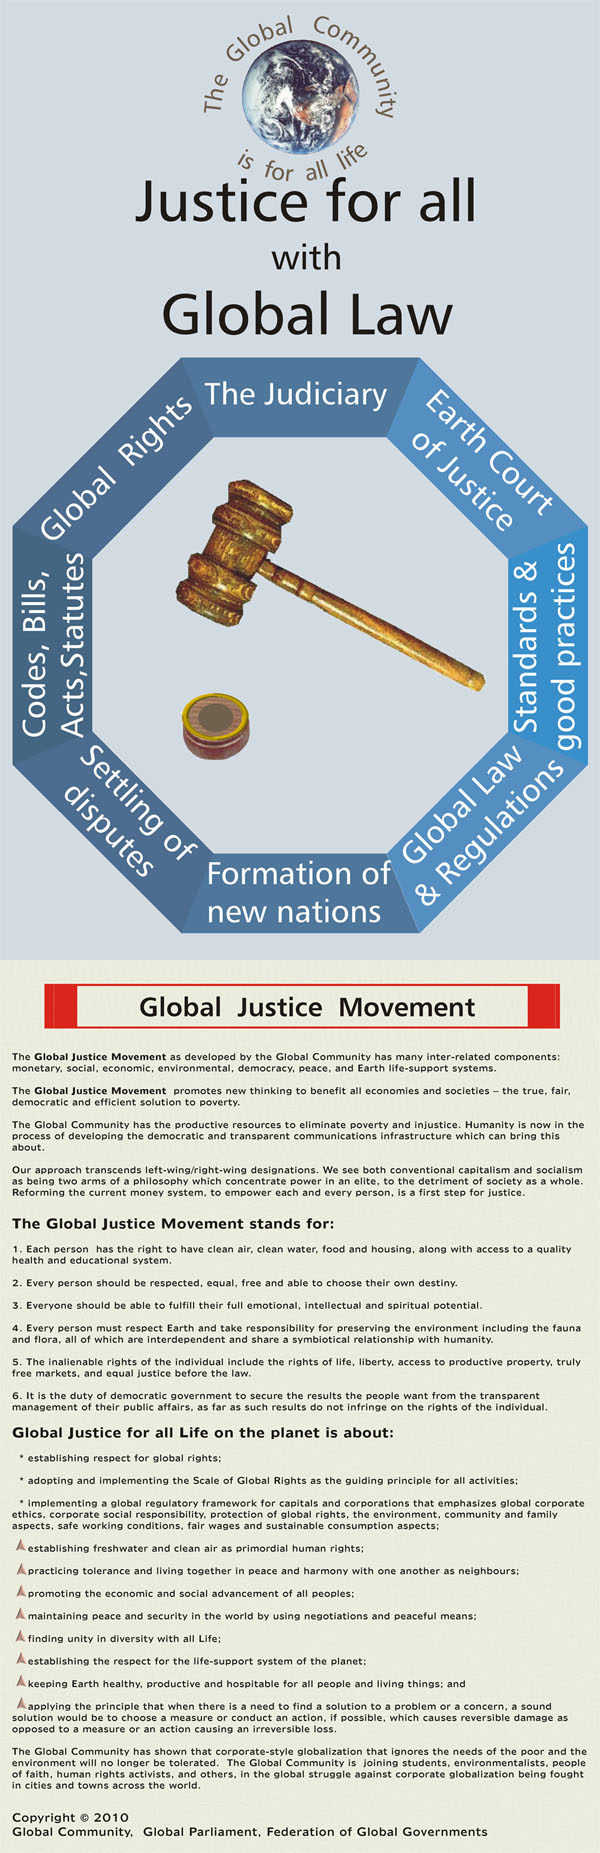 Justice for all with Global Law